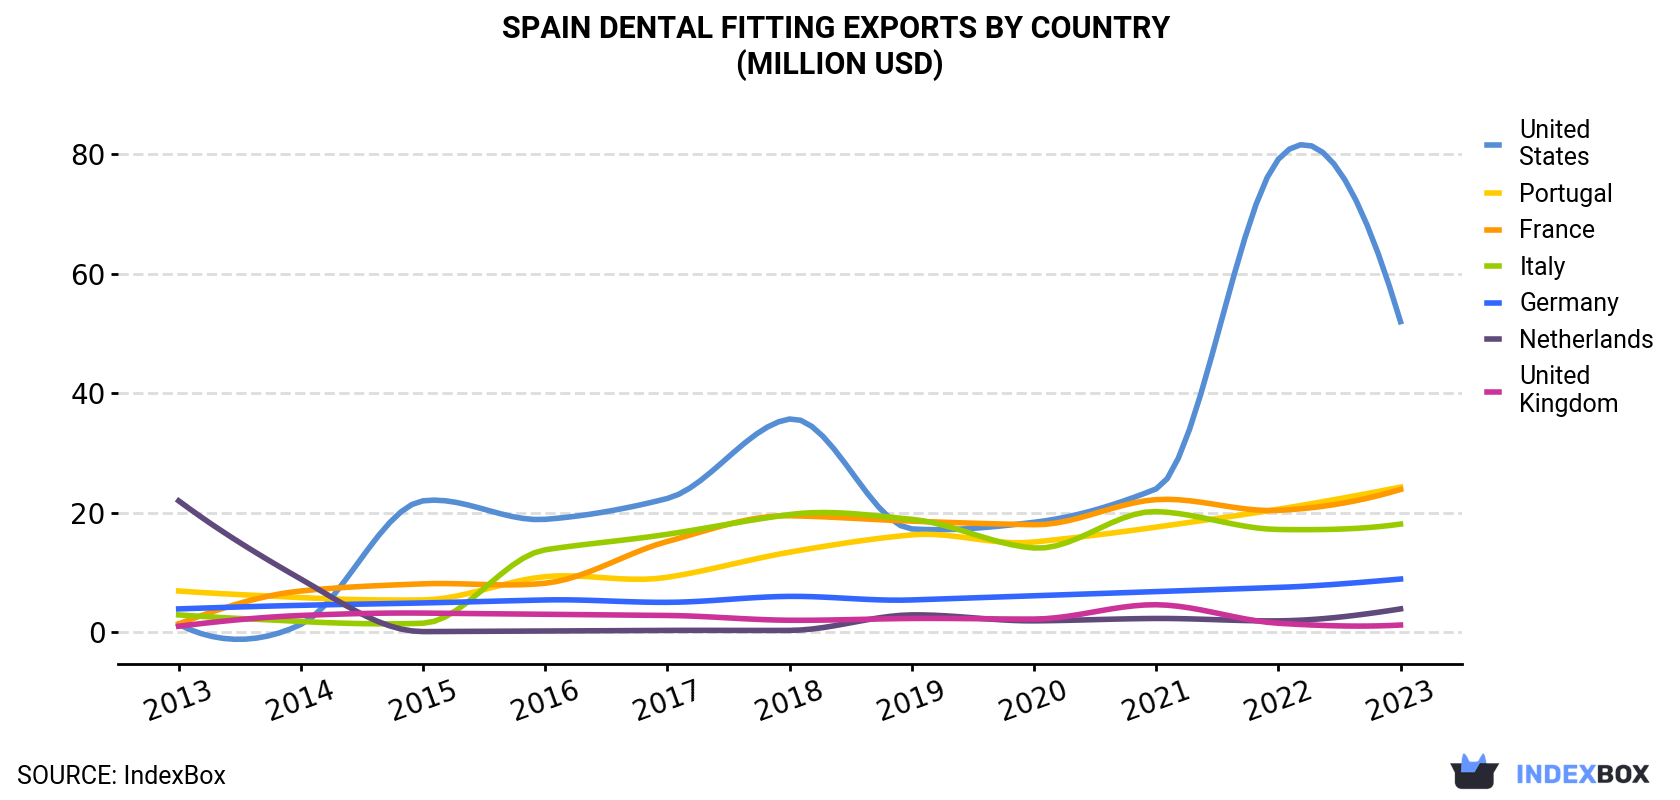 Spain Dental Fitting Exports By Country (Million USD)